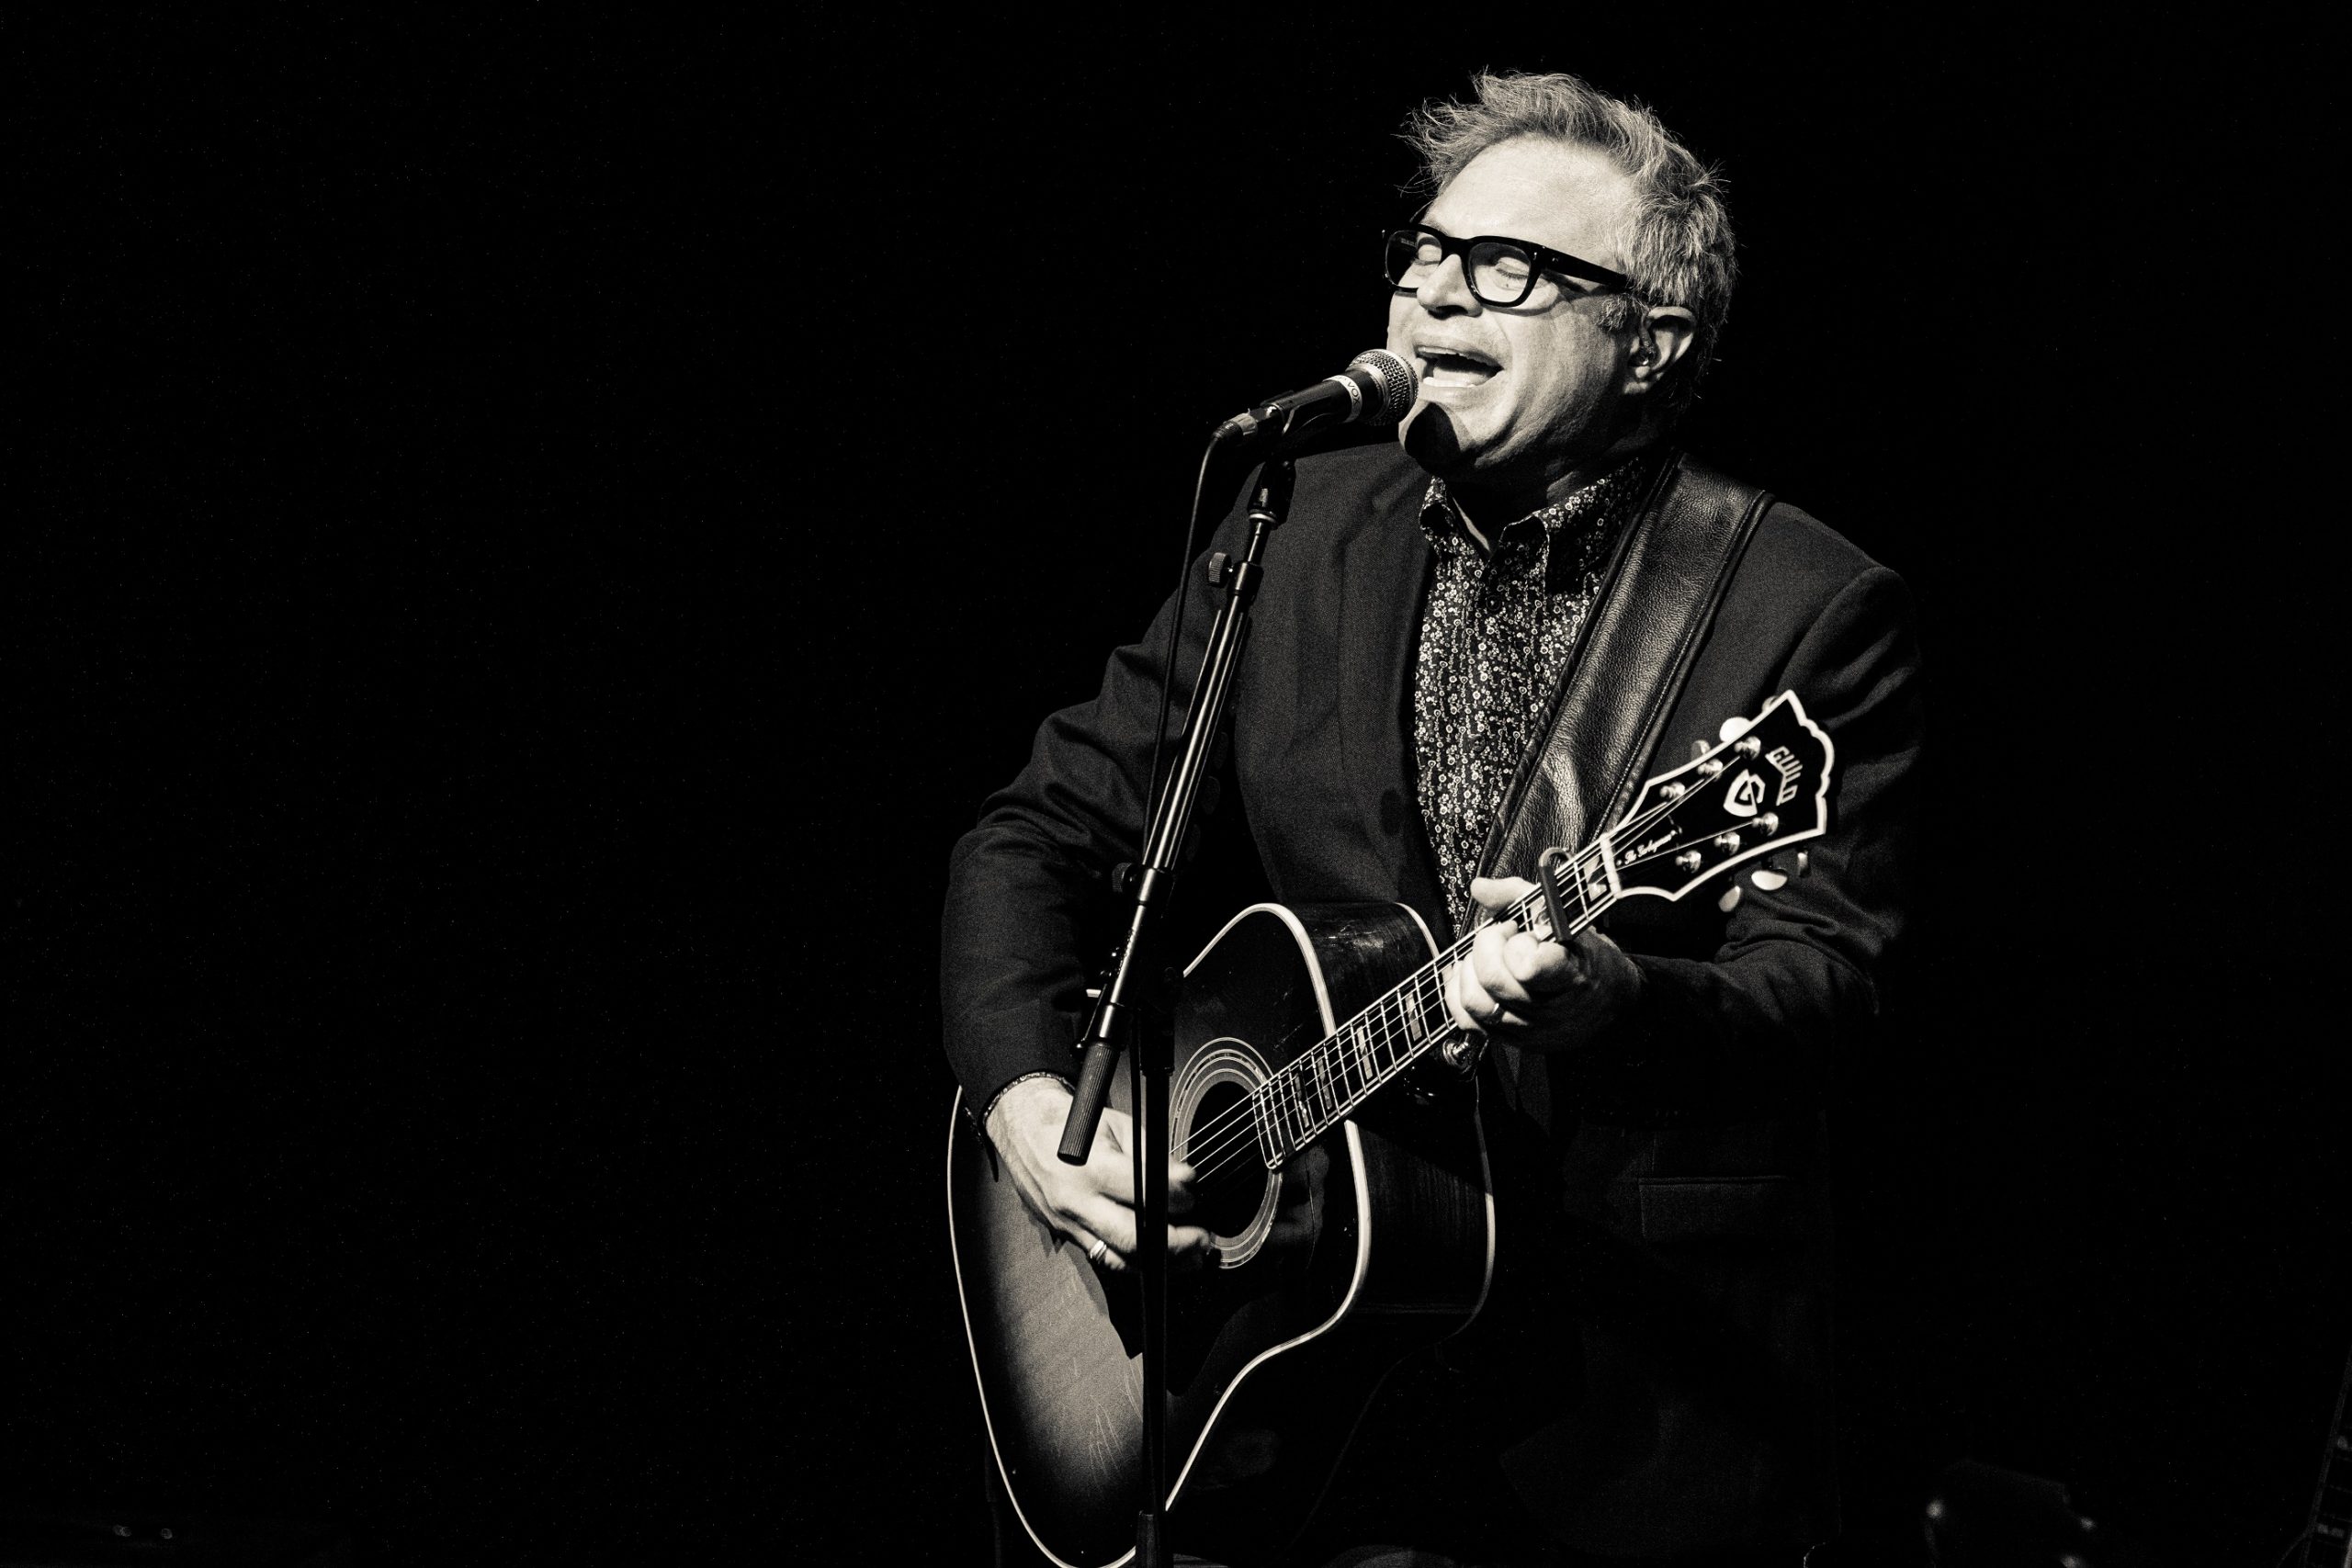 Image of Steven Page Performing